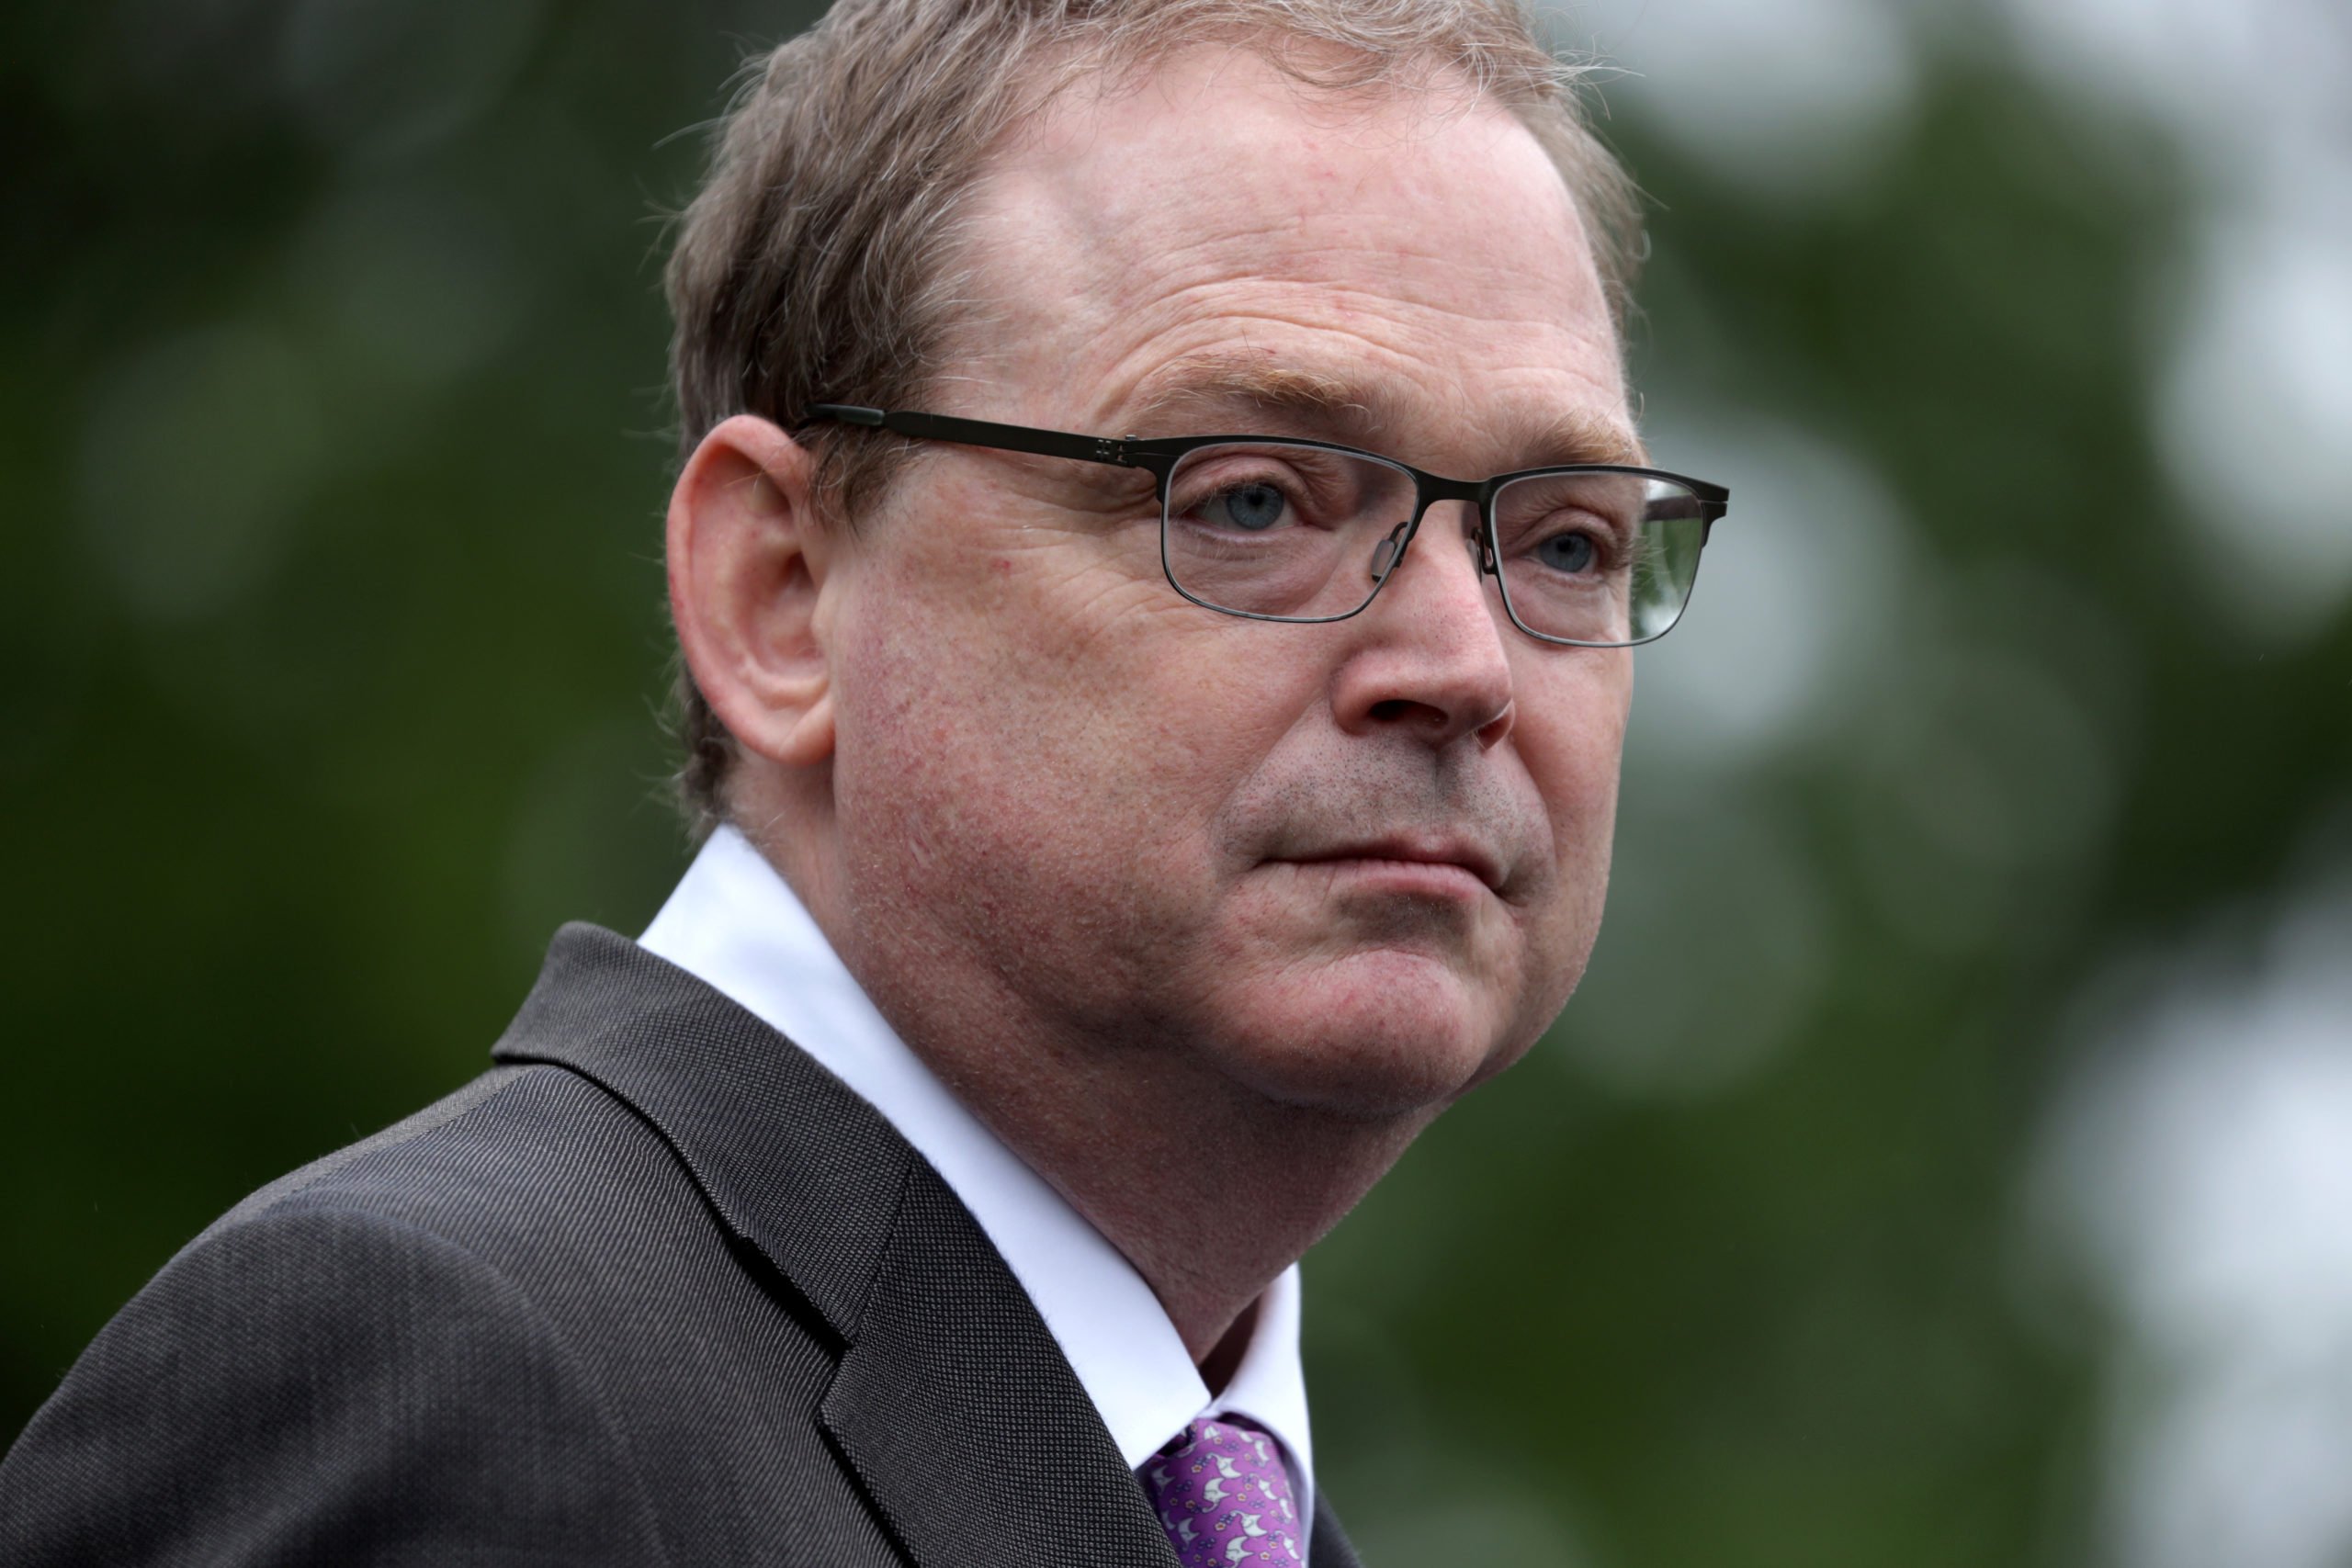 WASHINGTON, DC - MAY 22: White House economic adviser Kevin Hassett speaks to members of the press in front of the West Wing of the White House May 22, 2020 in Washington, DC. Hassett discussed on the economic outlook for the second half of the year. (Photo by Alex Wong/Getty Images)